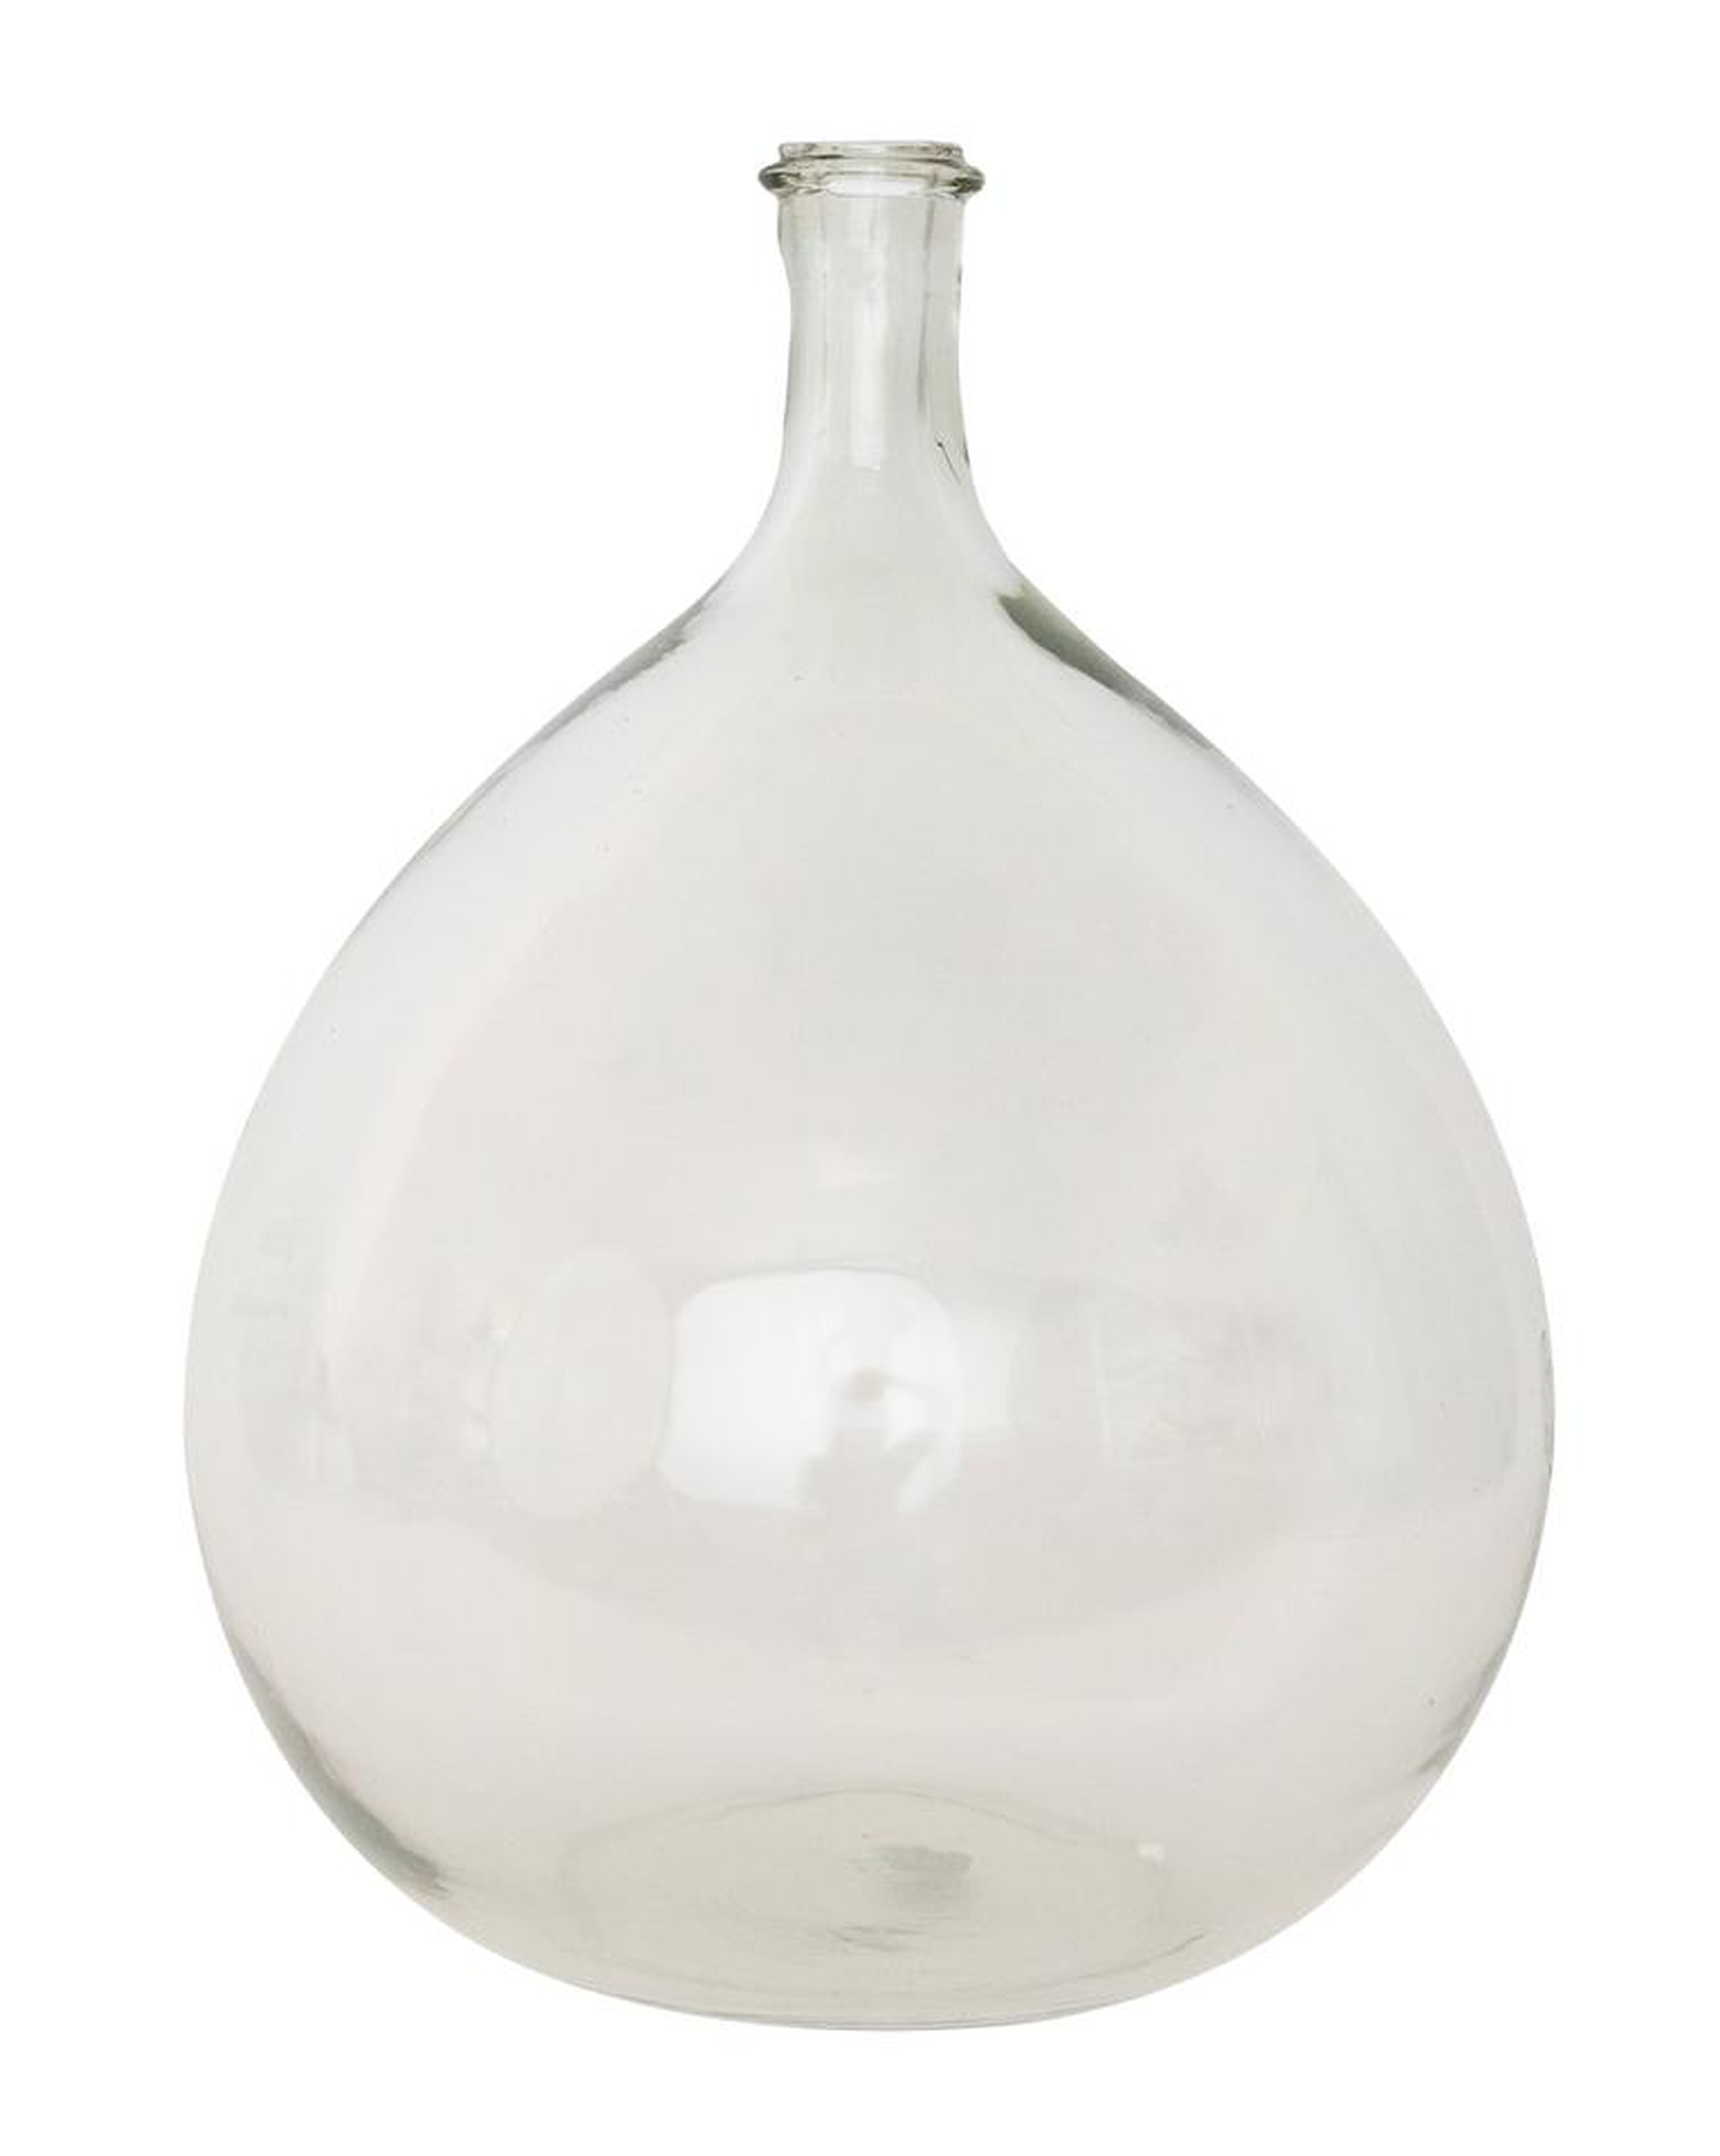 ROUND VINTAGE GLASS BOTTLE - McGee & Co.